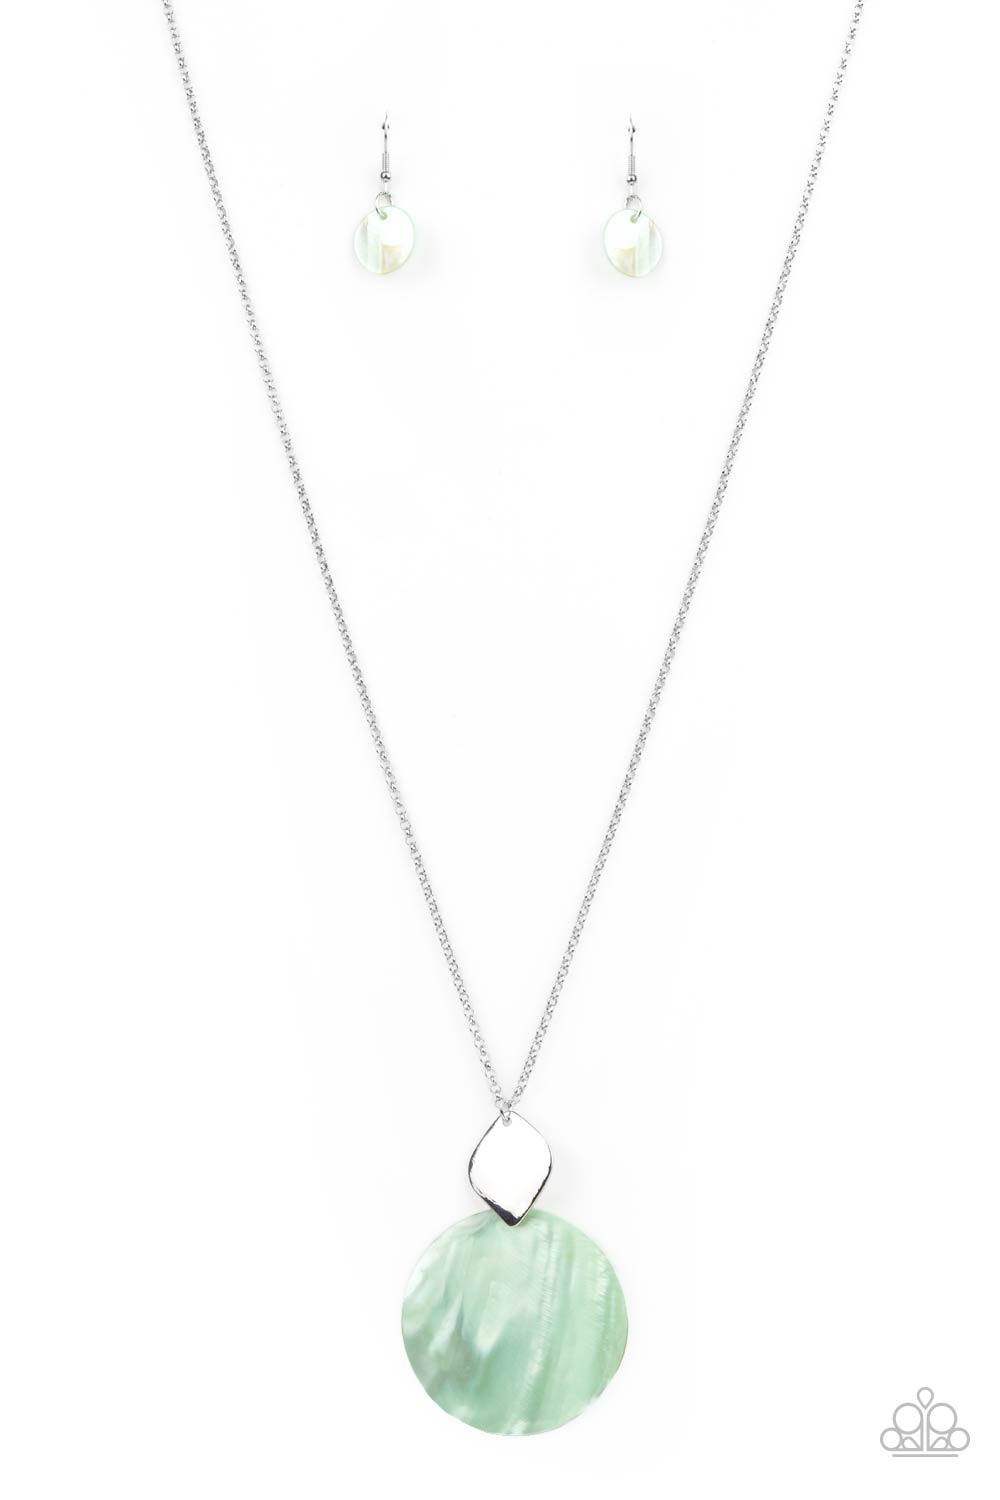 Tidal Tease Green Shell-like Necklace - Paparazzi Accessories- lightbox - CarasShop.com - $5 Jewelry by Cara Jewels